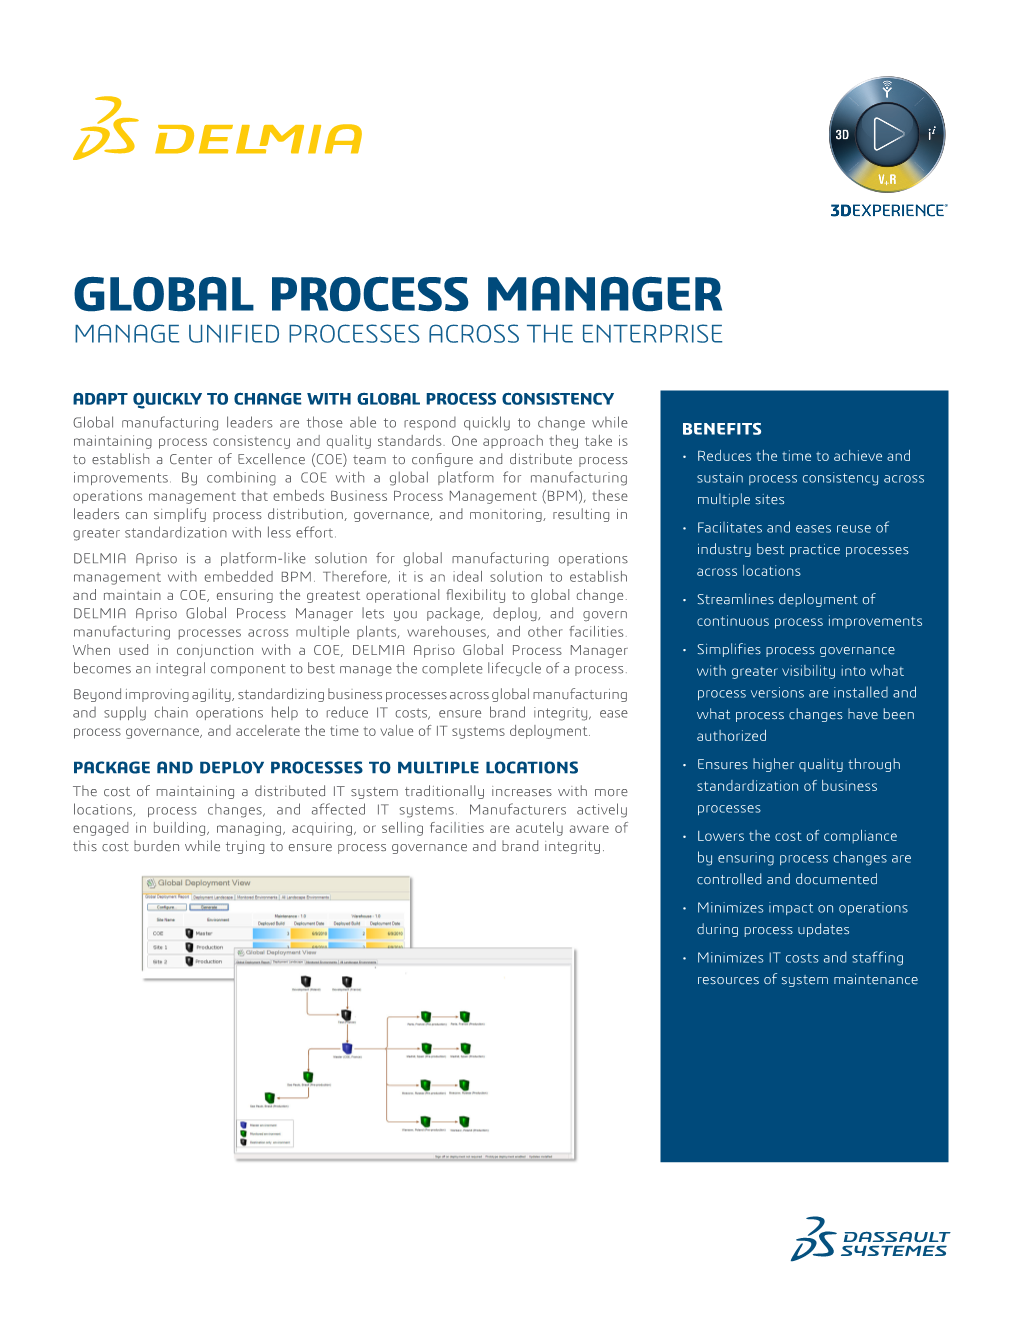 Global Process Manager Manage Unified Processes Across the Enterprise